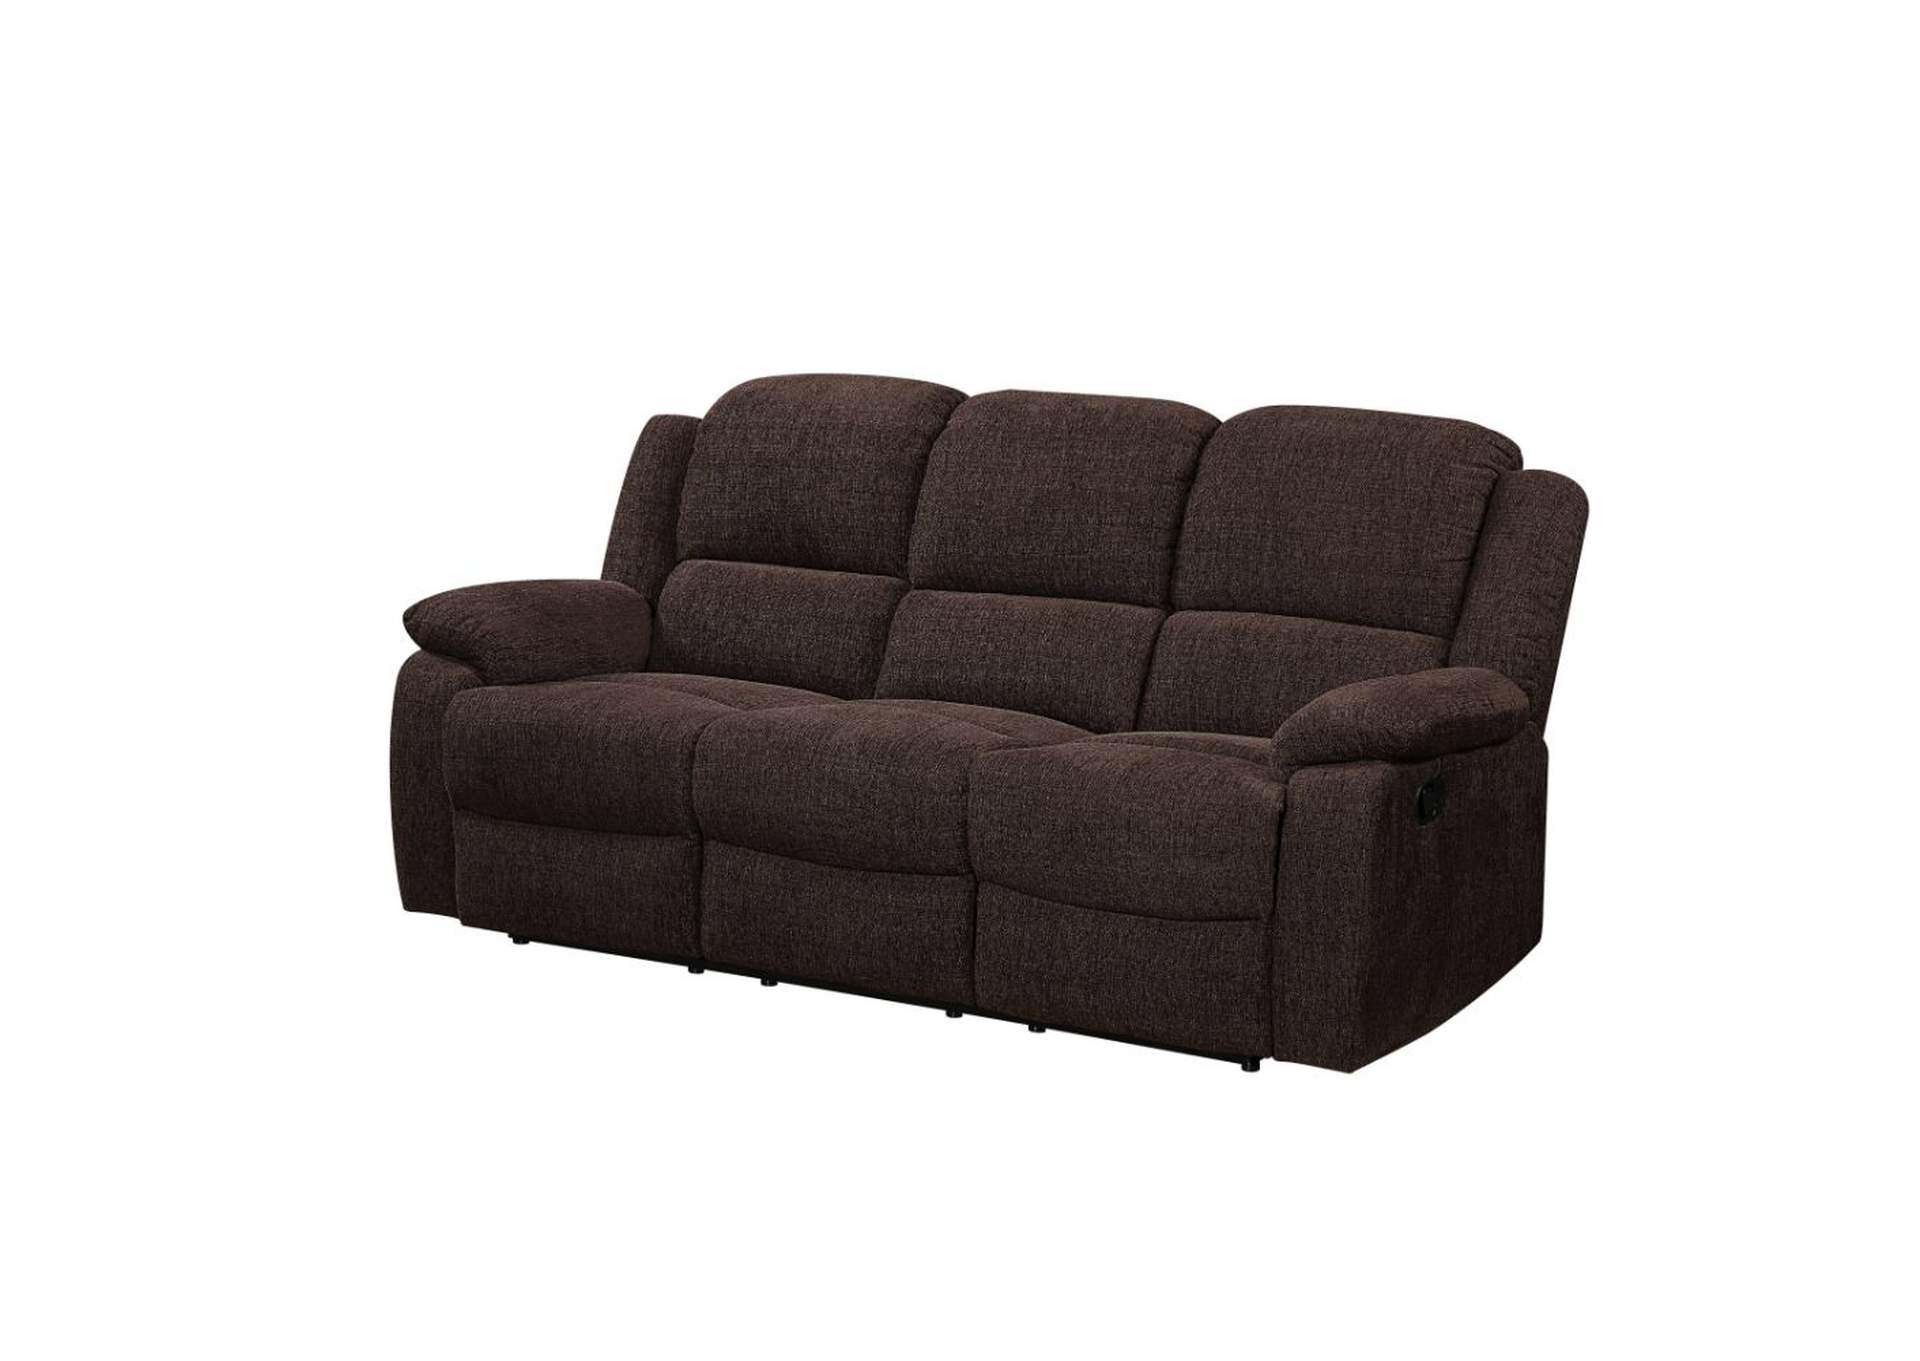 Madden Brown Reclining Sofa and Loveseat,Acme